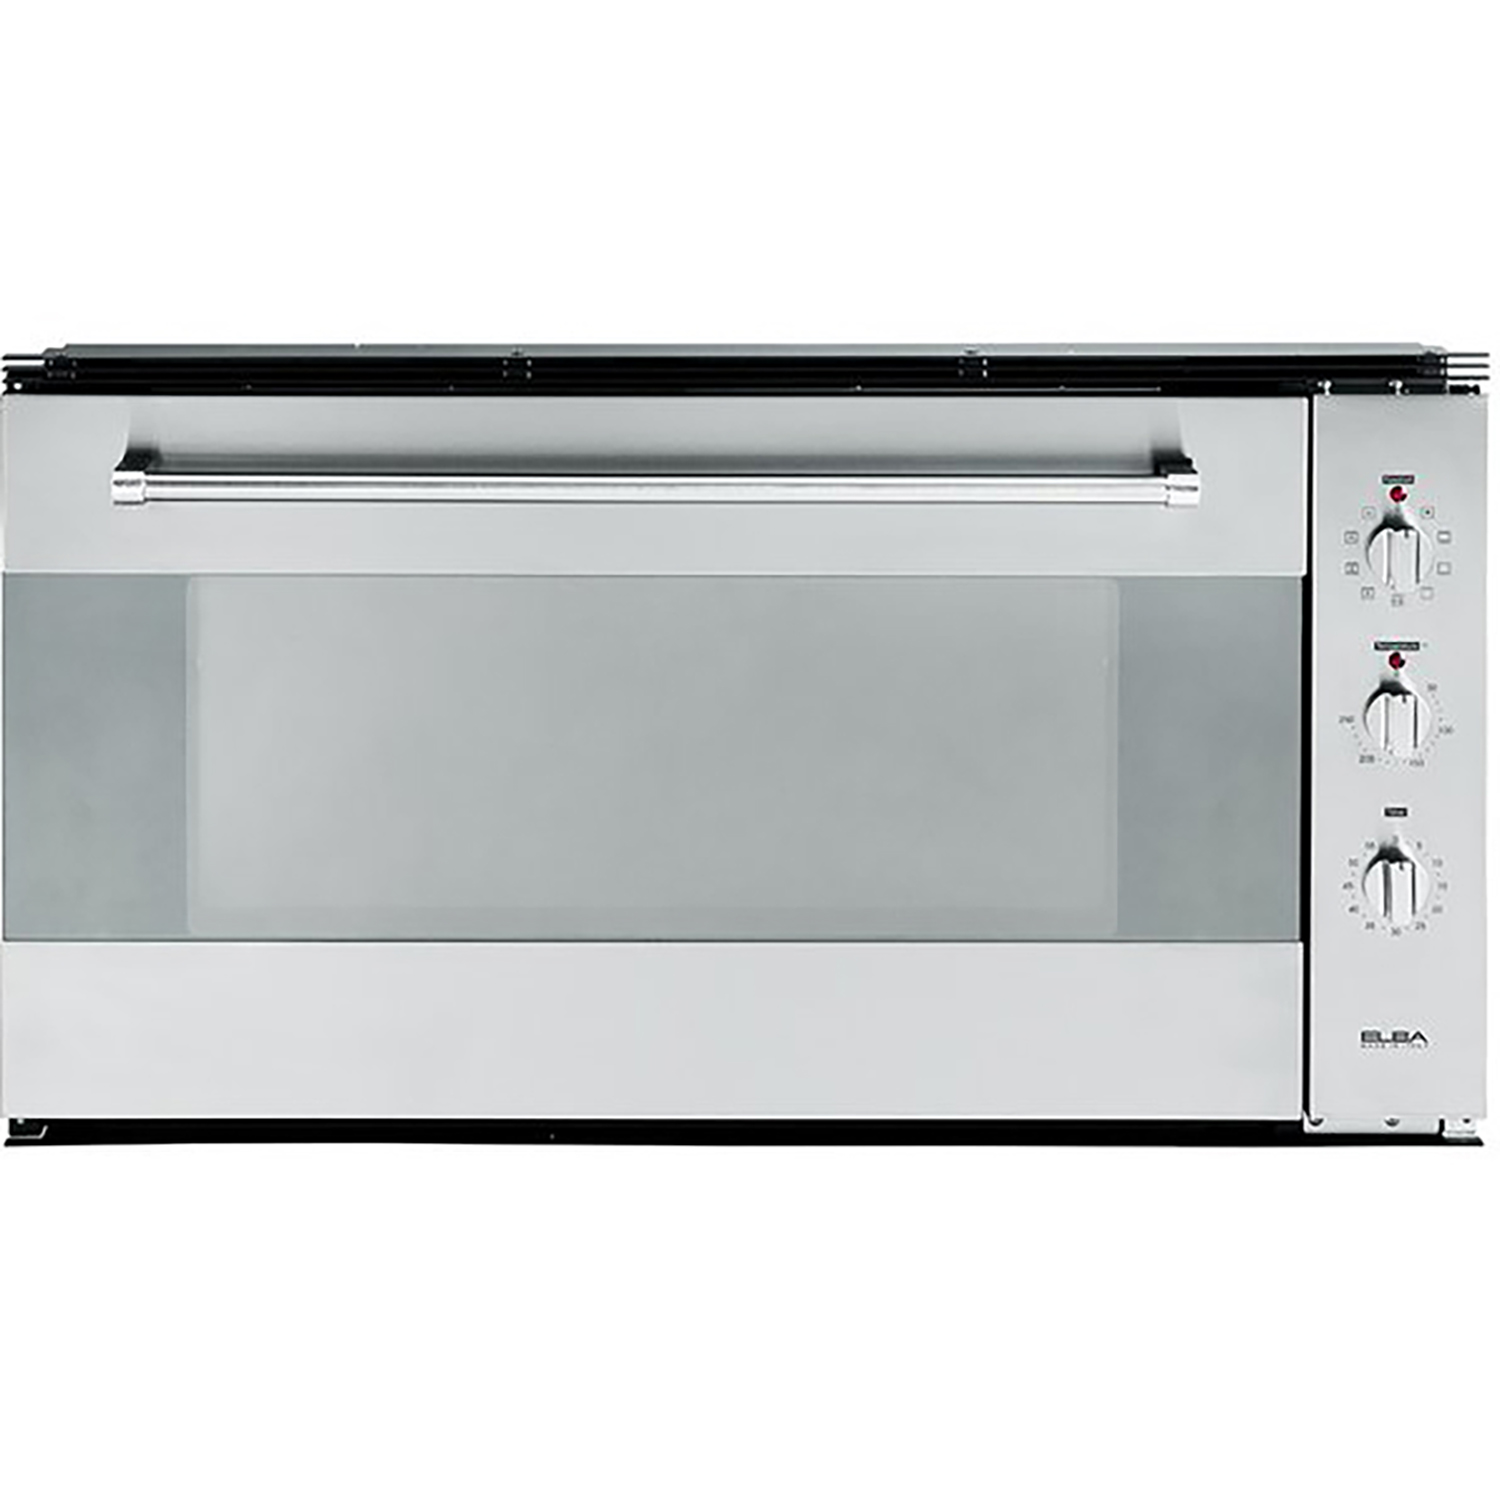 102 501XMA - Elba Electric oven 90 cm, Stainless steel 102-501XMA